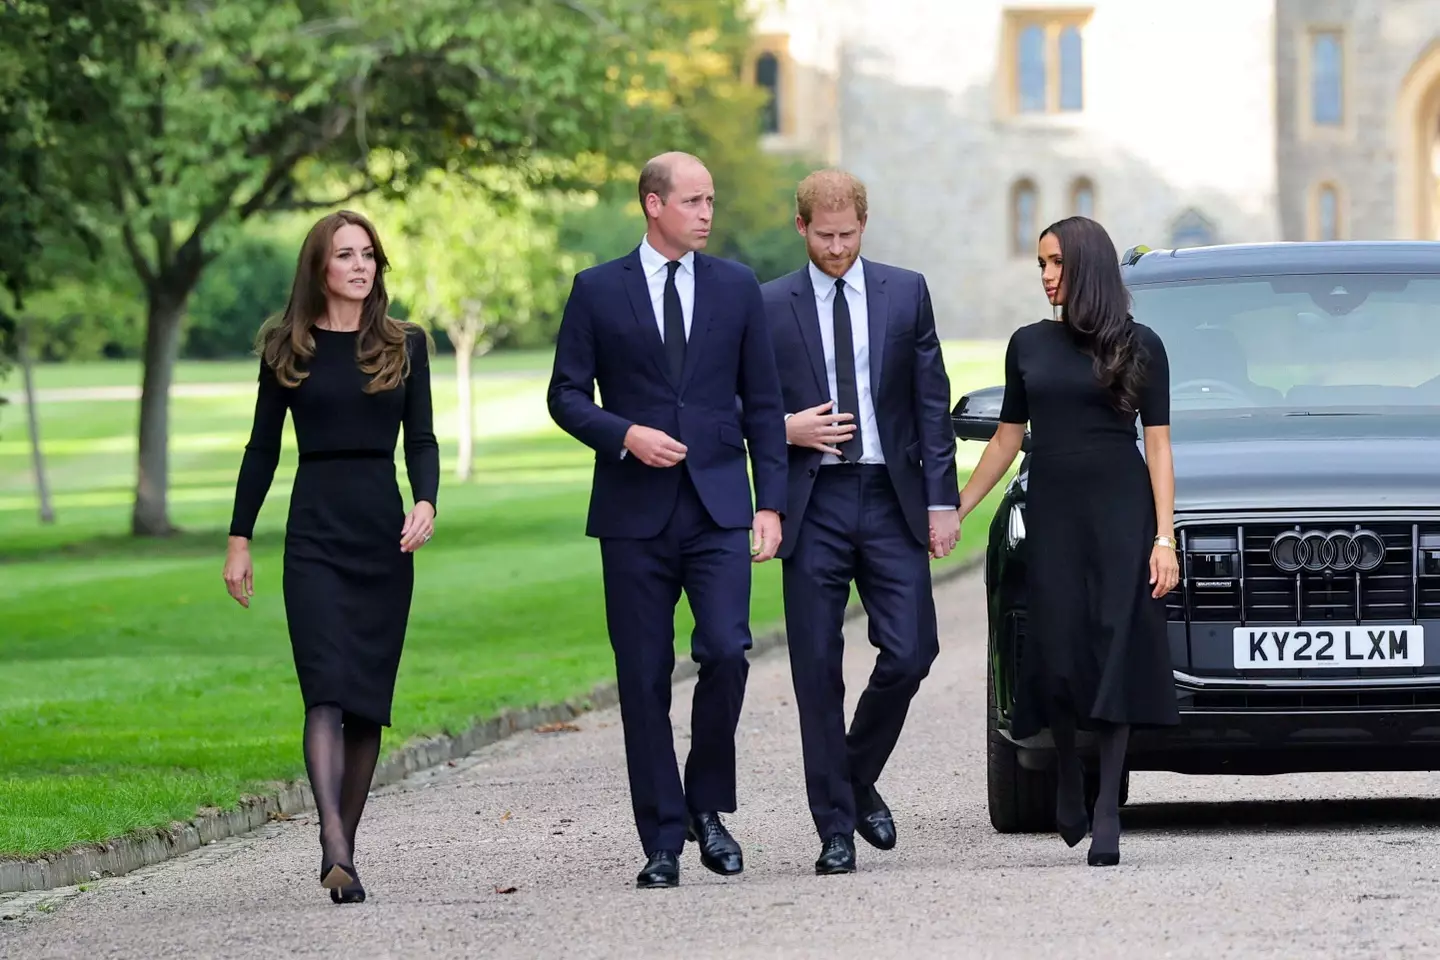 Kate, William Harry and Meghan were reunited for Queen Elizabeth II's funeral this month.